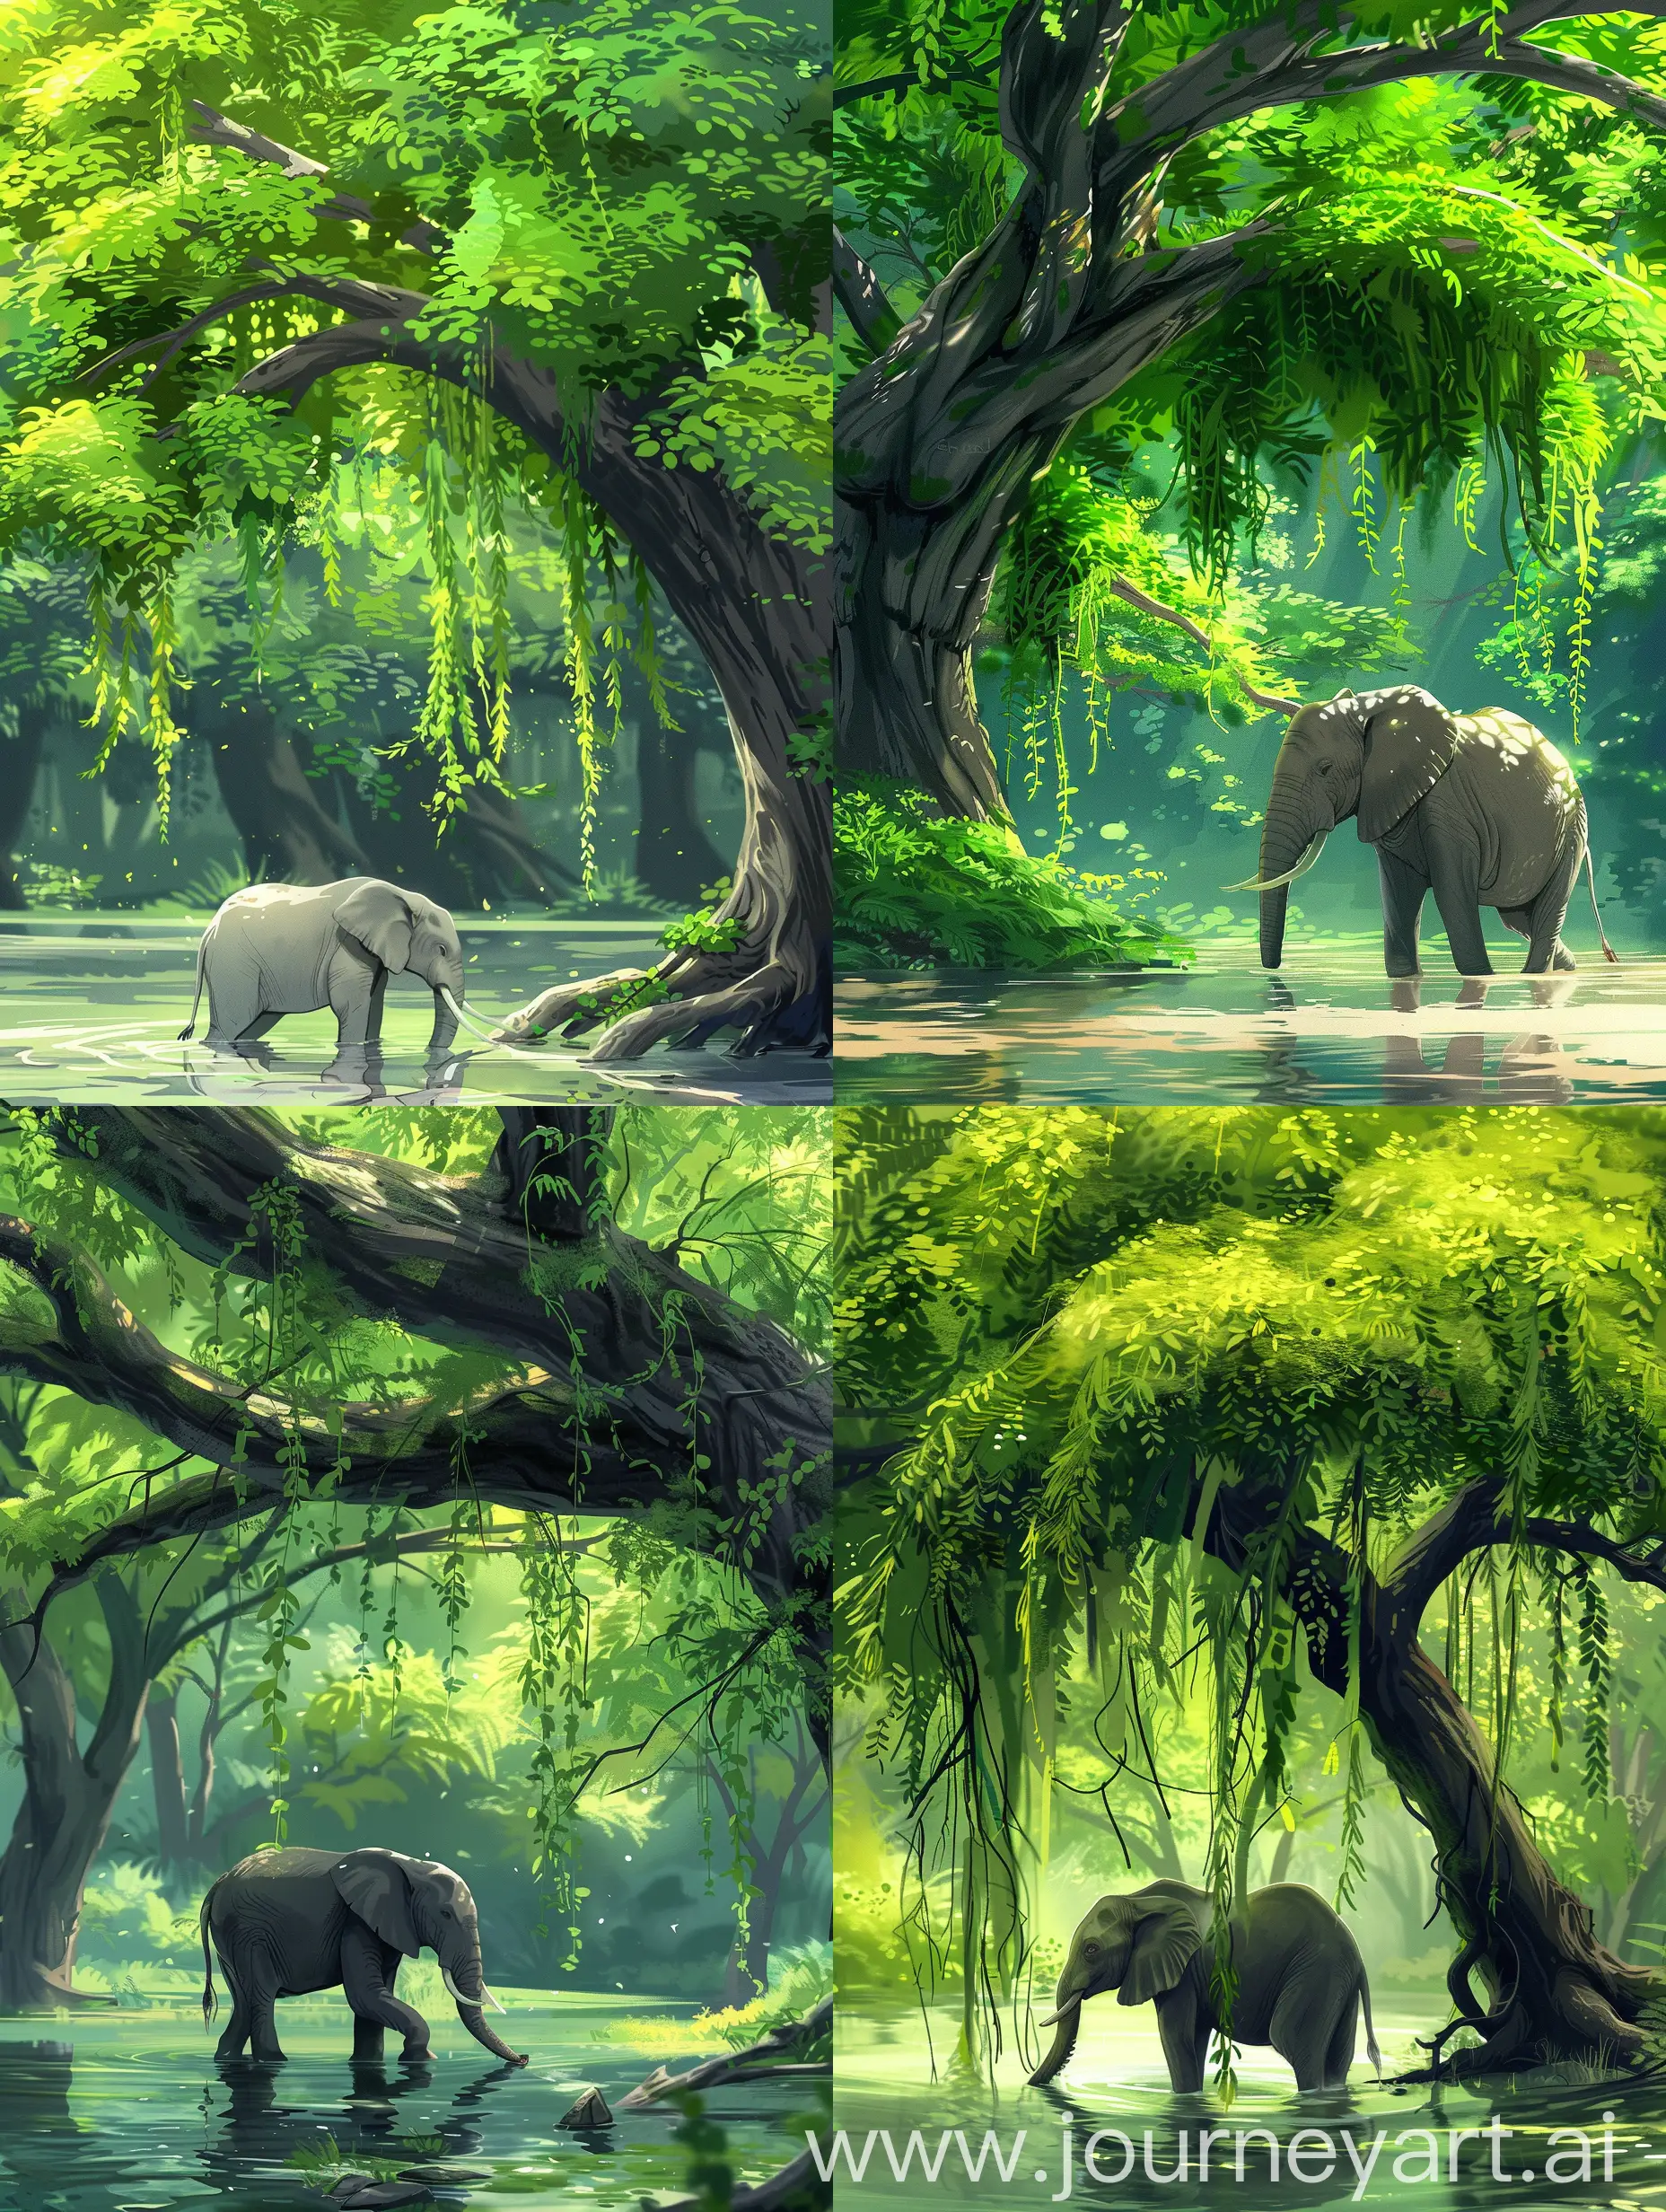 Anime style,realistic but yet its sylized,a serene depiction of an elephant standing in shallow water, surrounded by a lush green landscape. The elephant is the focal point of this tranquil scene, which is enhanced by an overhanging tree with long, draping branches adorned with bright green leaves. The background is filled with various shades of green foliage, contributing to the peaceful and harmonious atmosphere captured in the image. It seems to illustrate the peaceful coexistence of wildlife within their natural habitat.